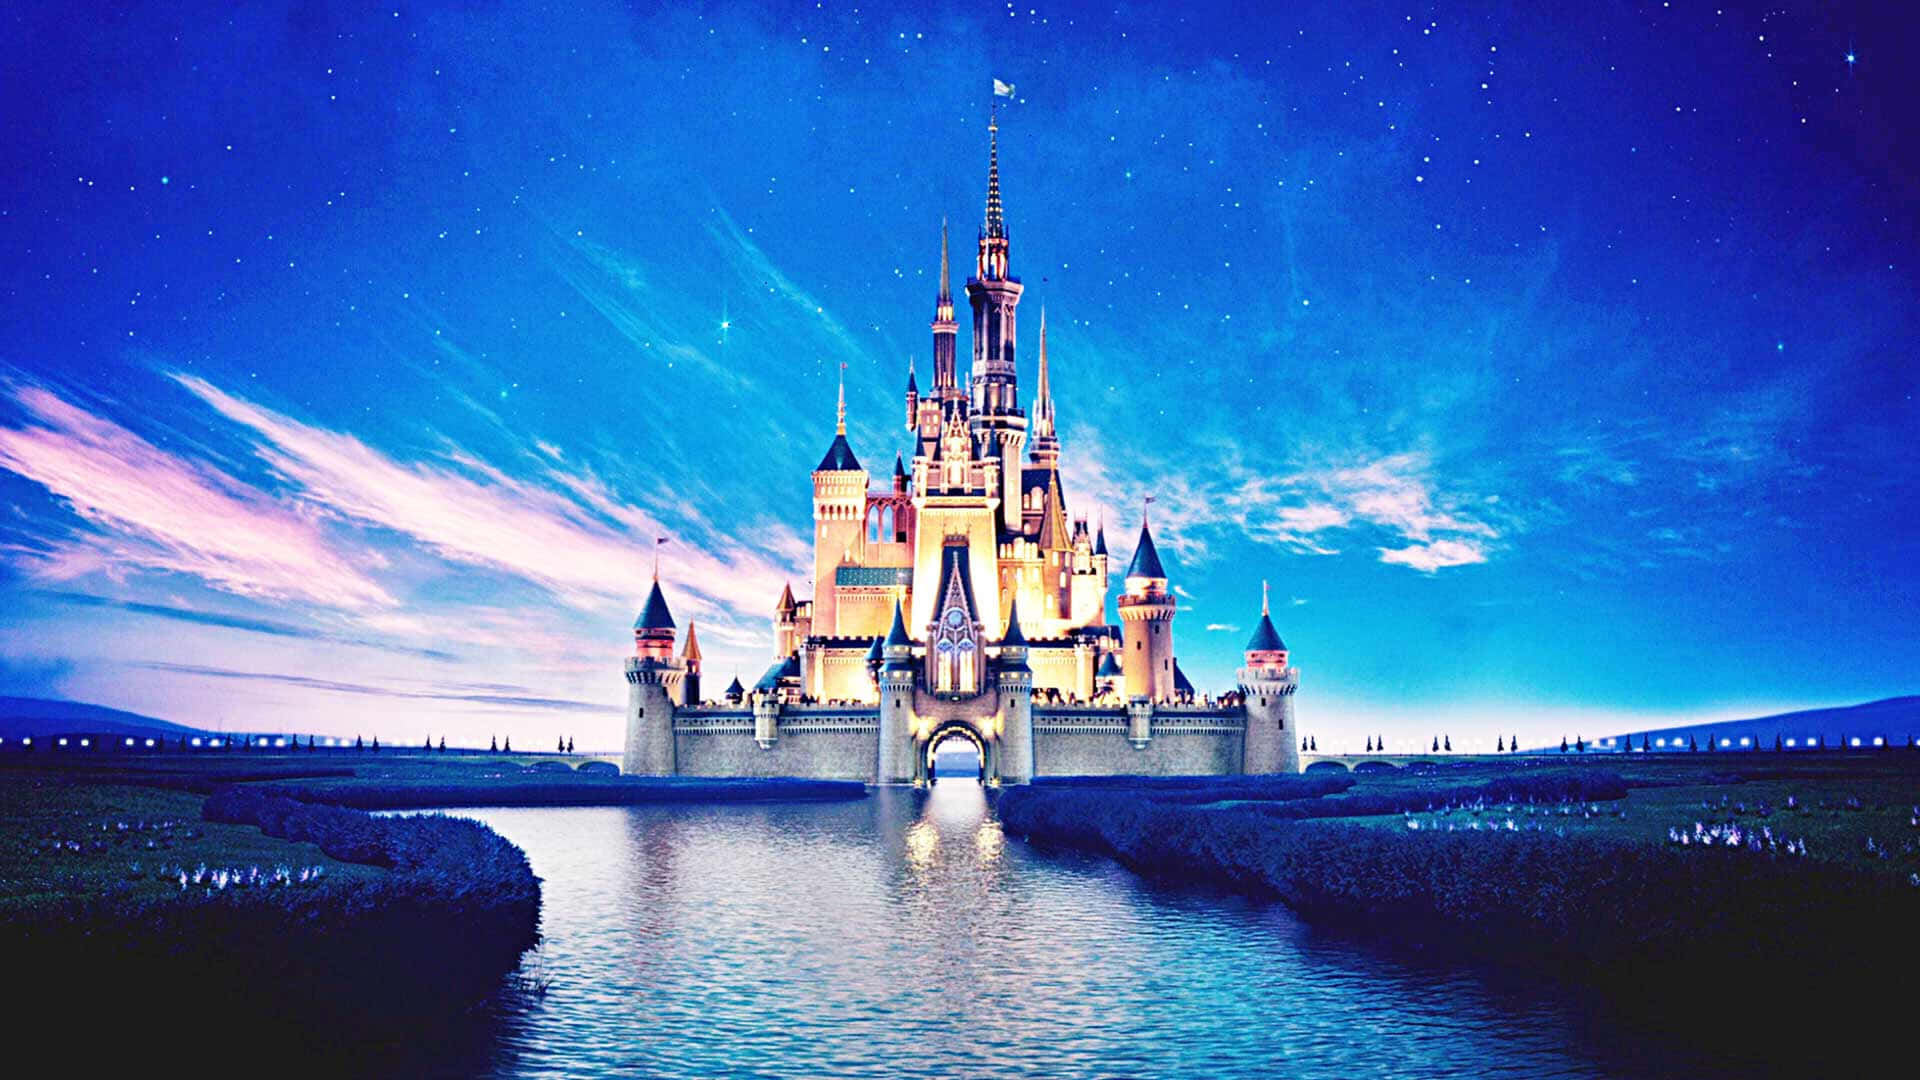 "Experience the Magic at Disney Castle"